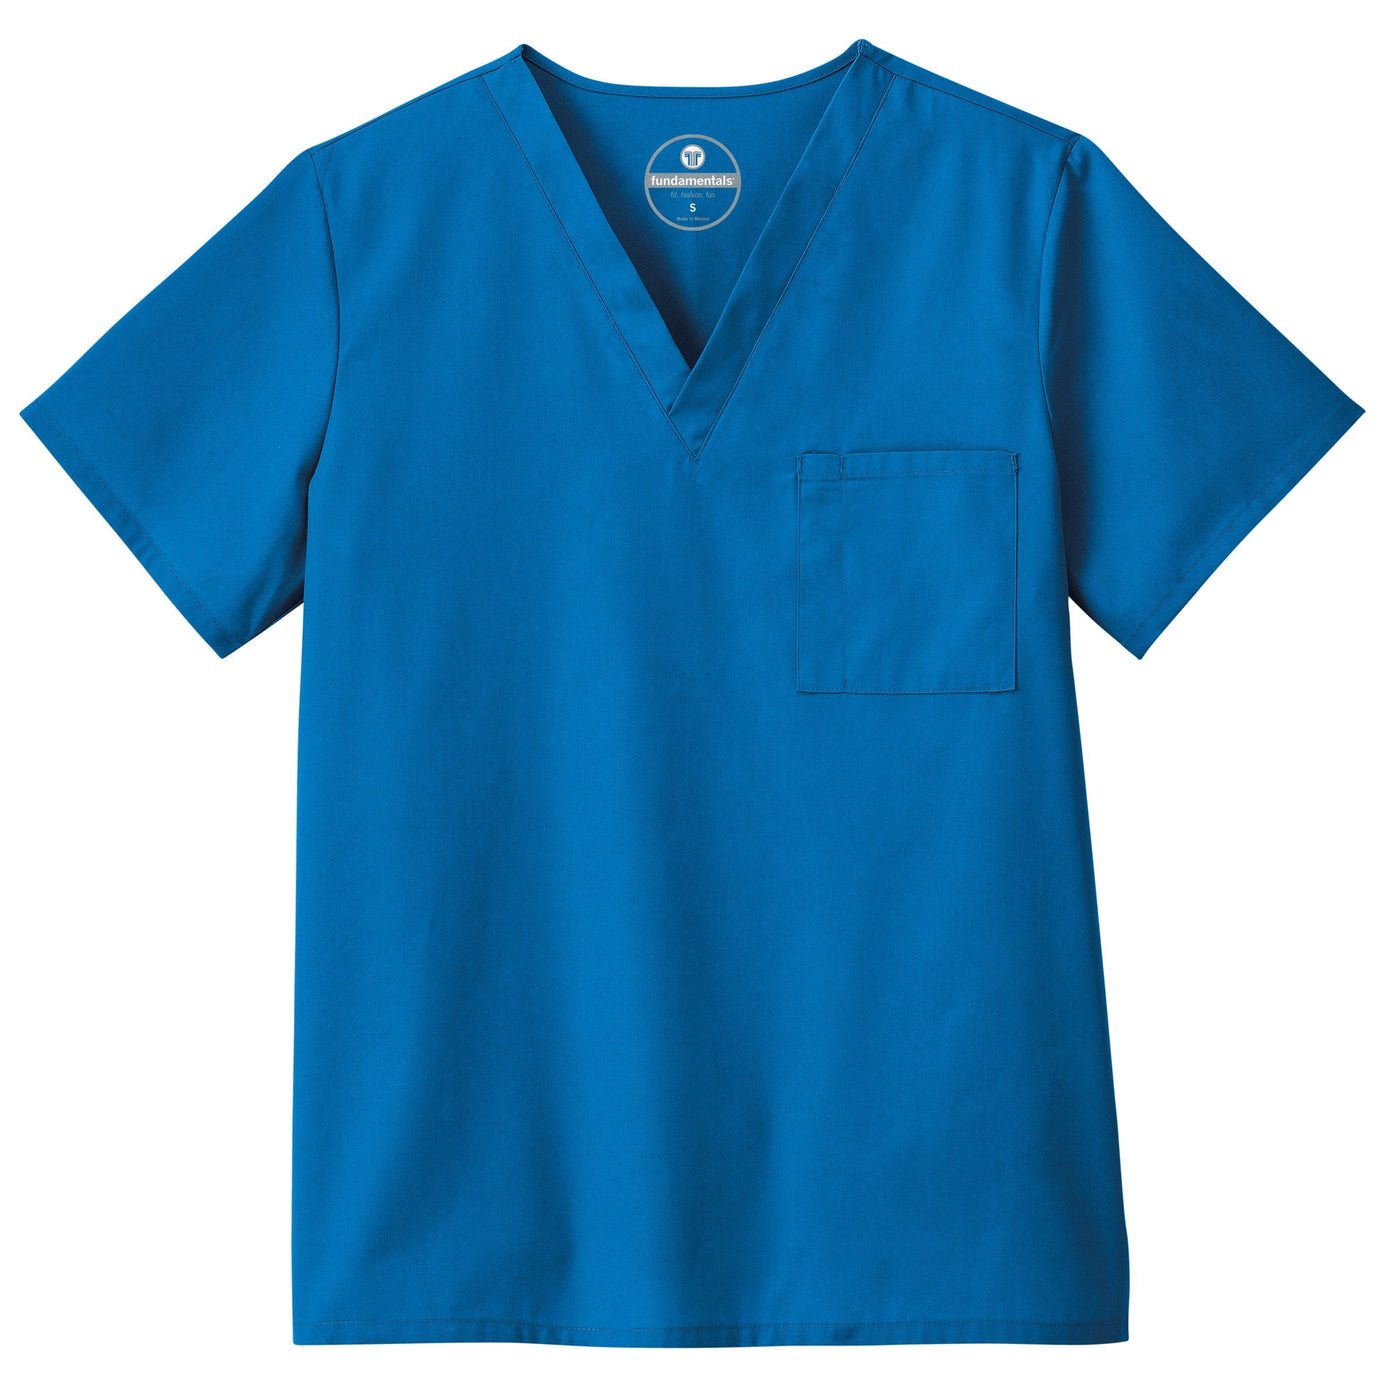 Fundamentals Unisex One Pocket Top Style: 14900 - Sophisticated Scrub Boutique